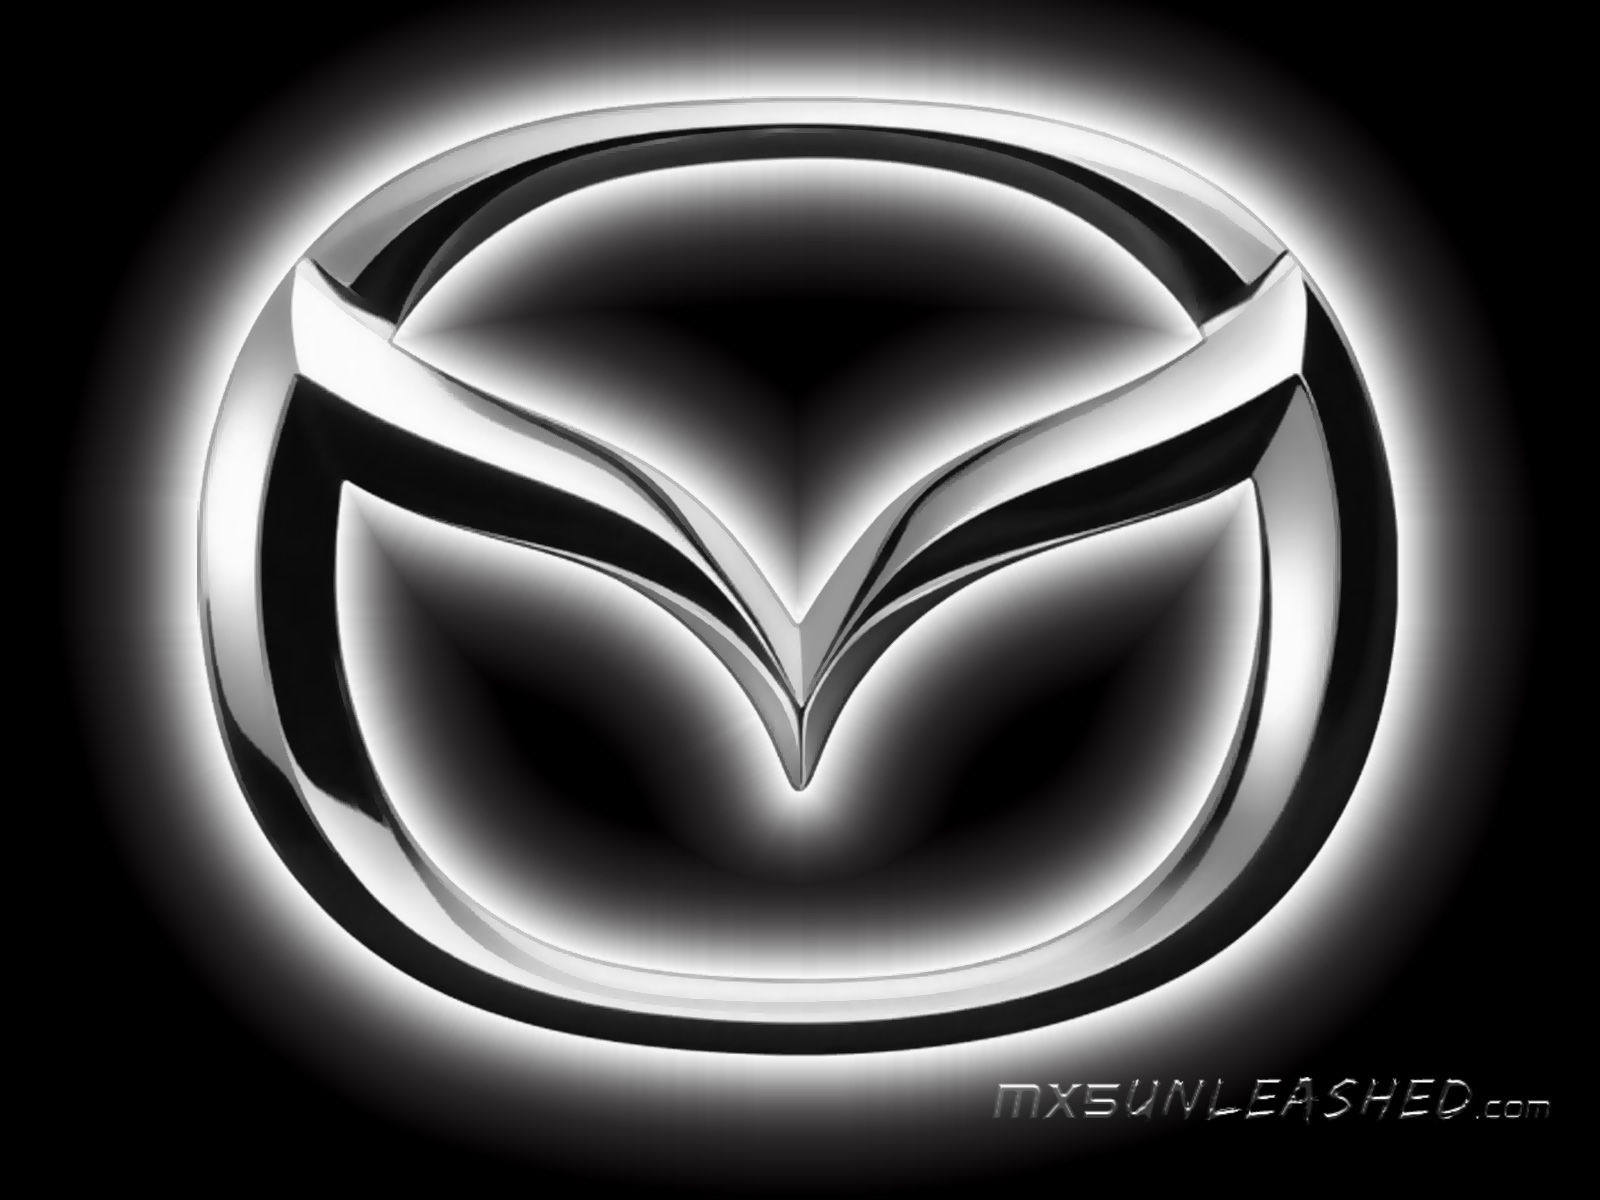 Undefined Mazda Logo Wallpaper - Single Car Company Logos With Names , HD Wallpaper & Backgrounds